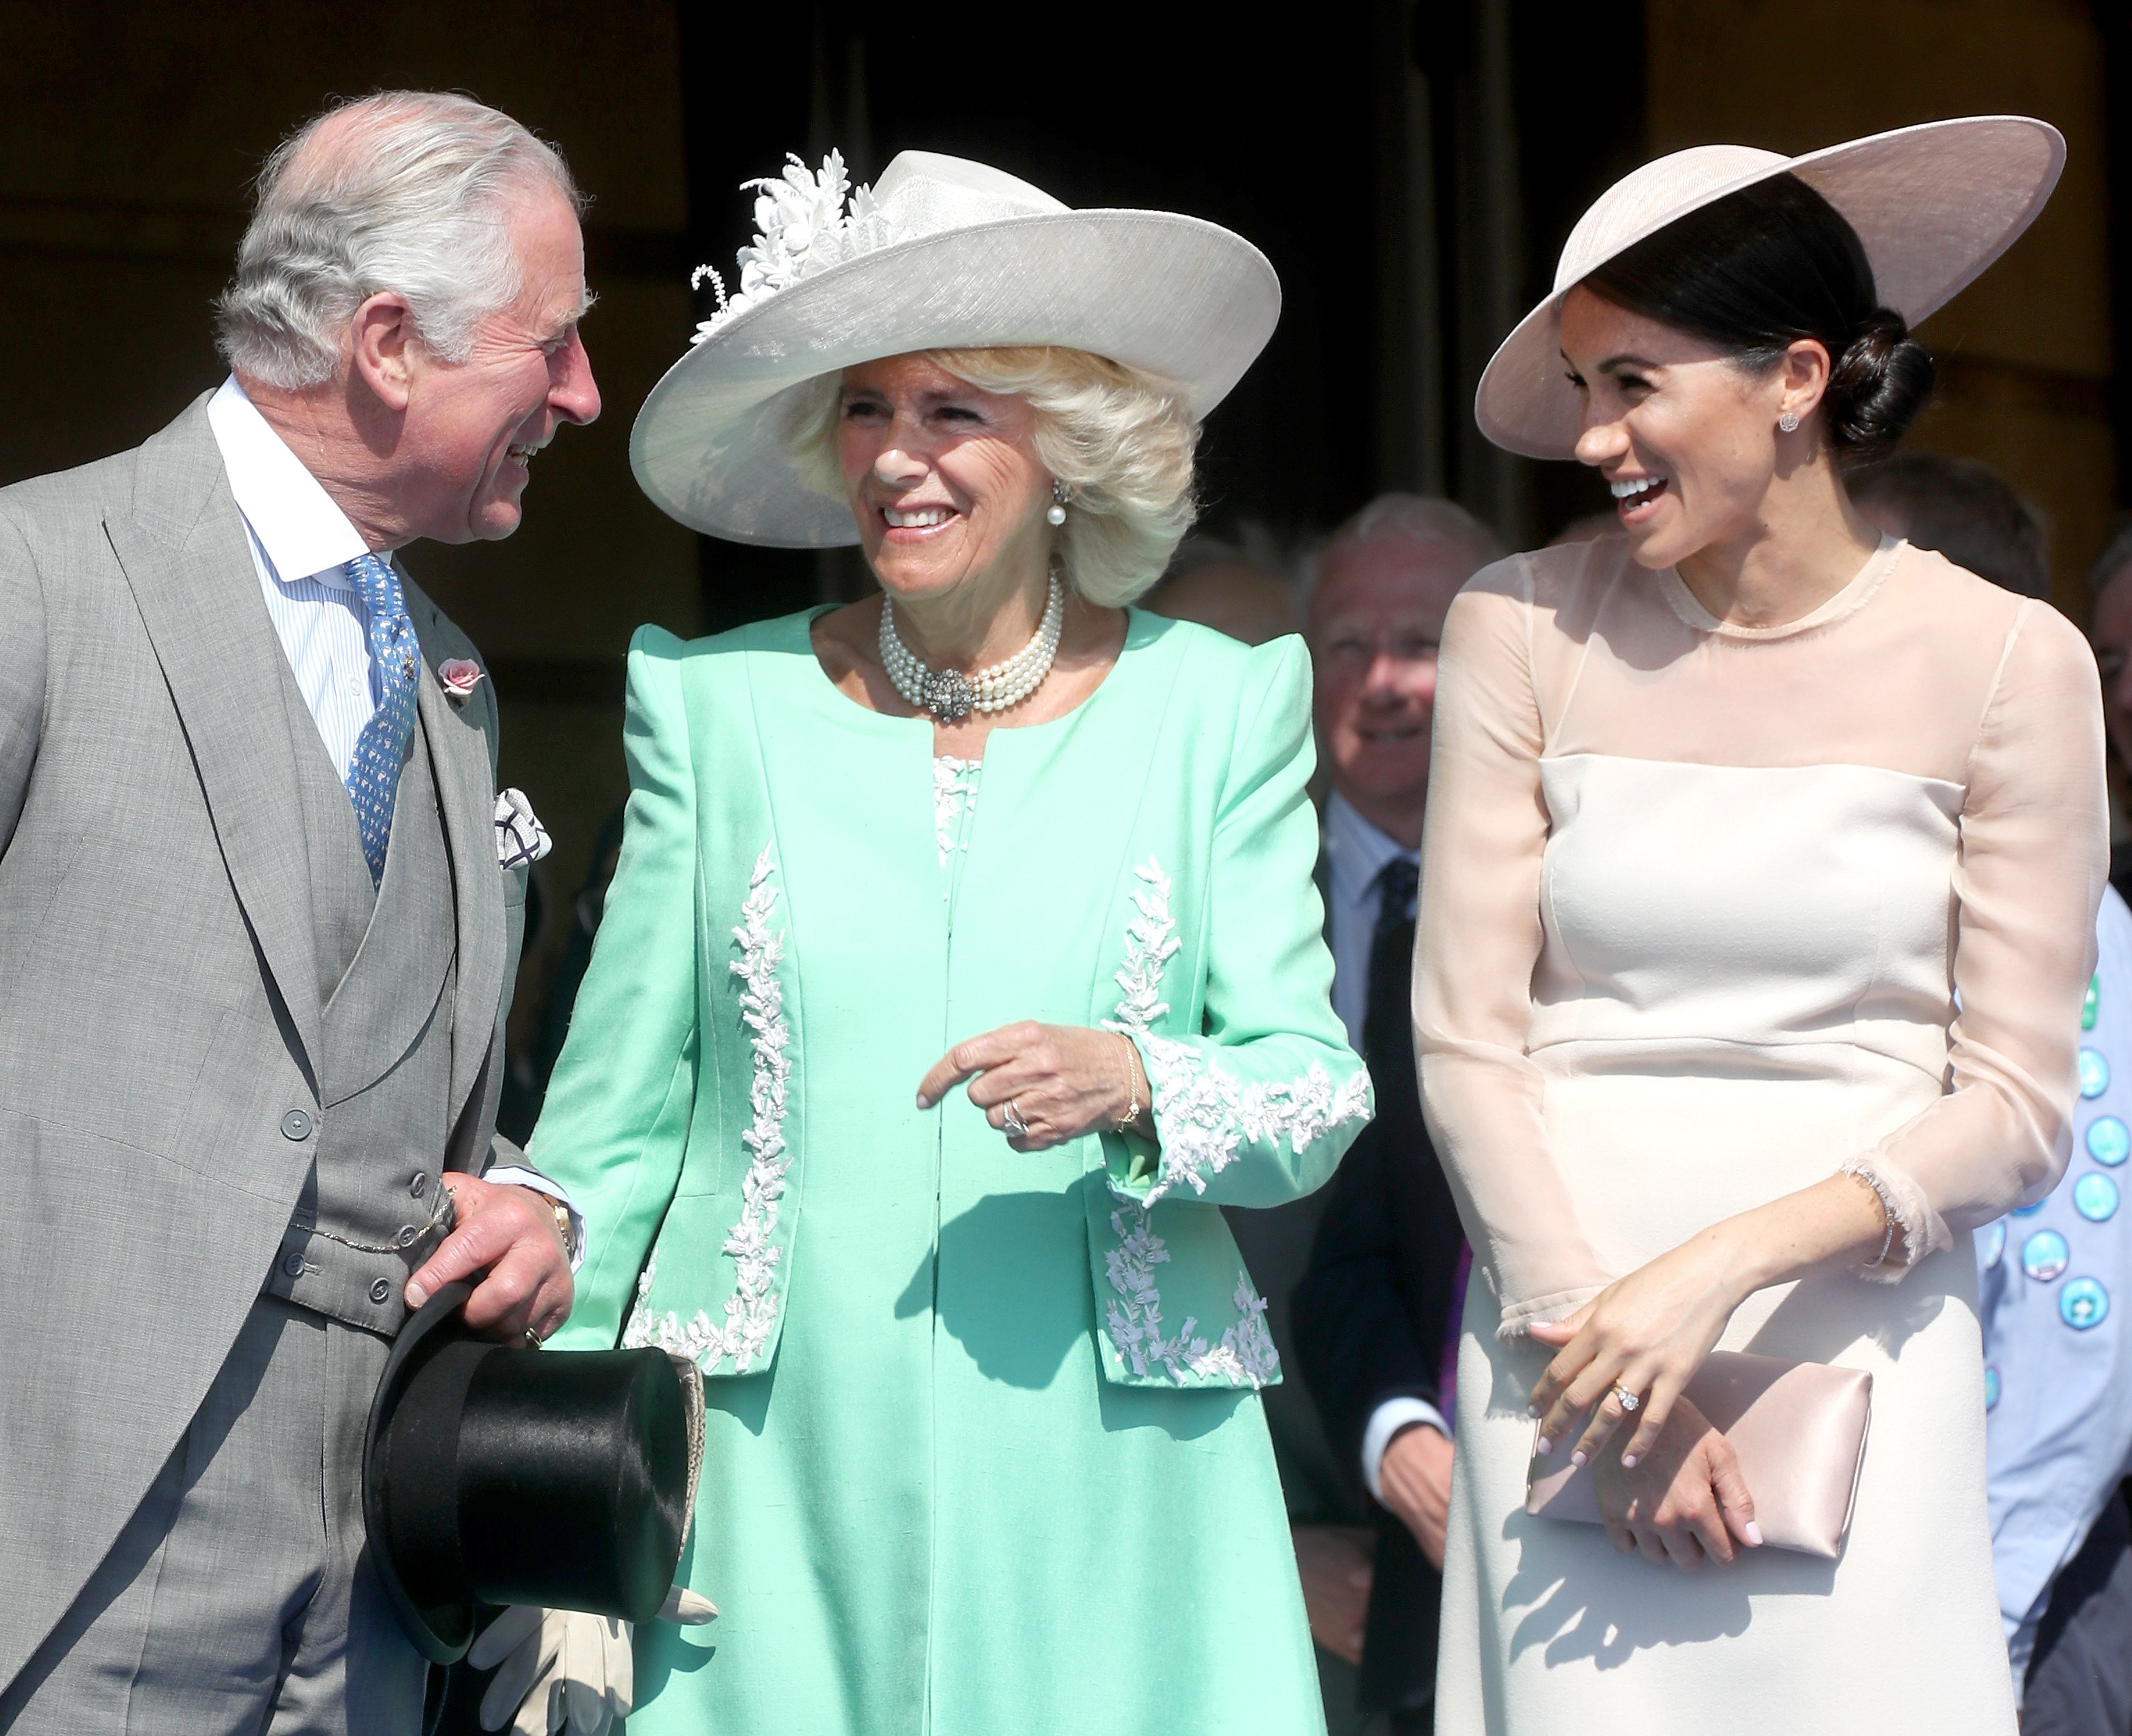 Prince Charles, Camilla and Meghan Markle at at Buckingham Palace in 2018. | Source: Getty Images